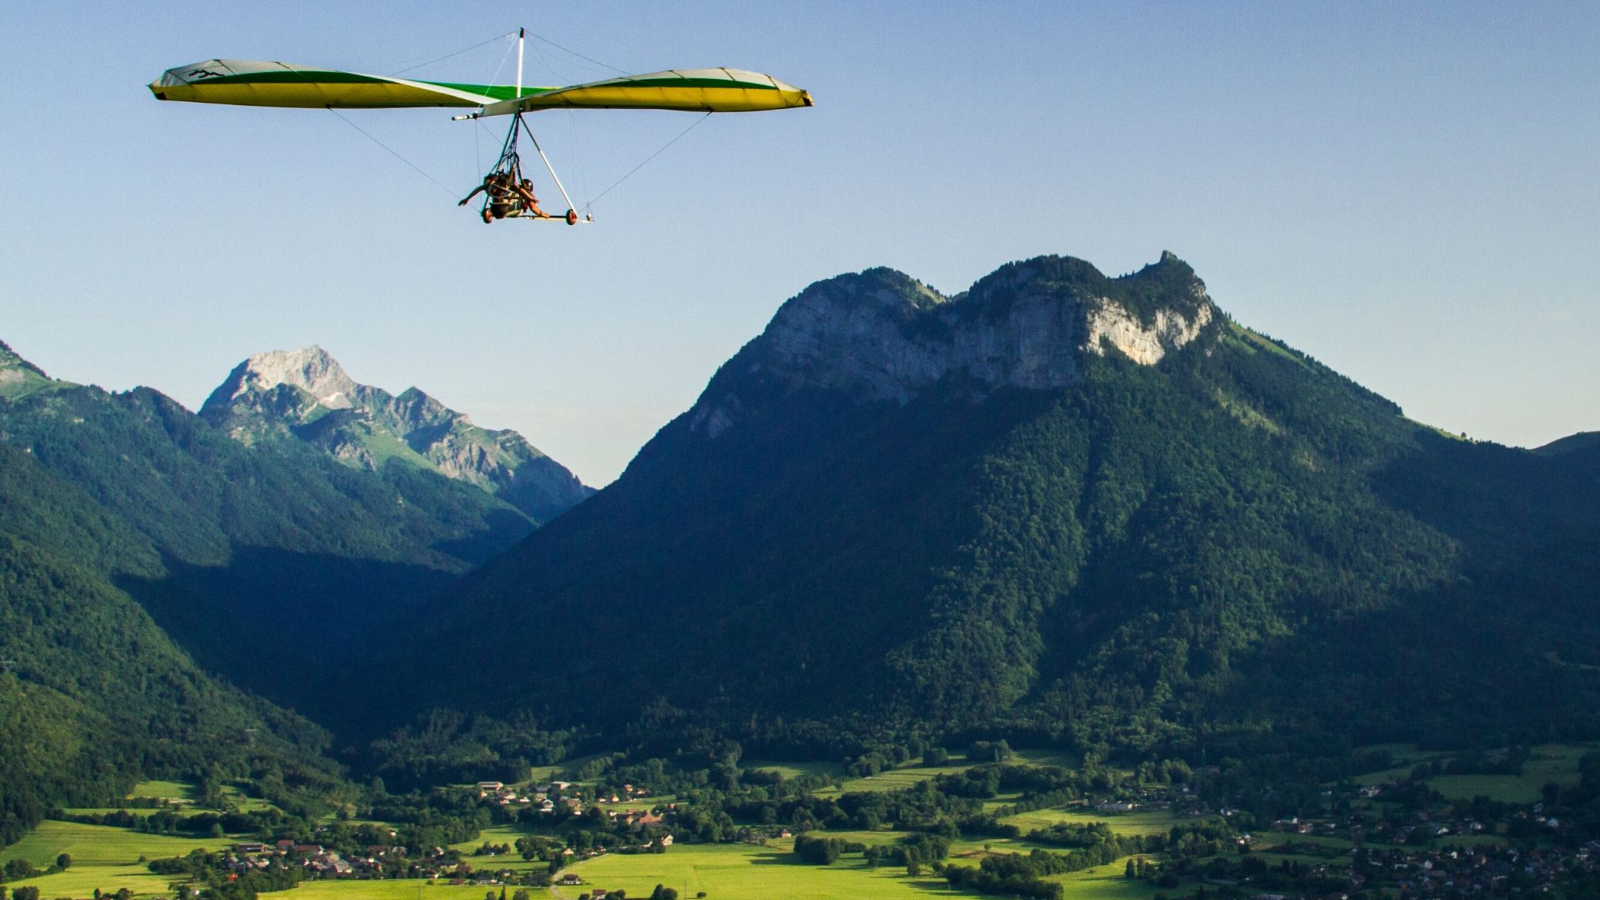 hang-gliding flight mountains and valley